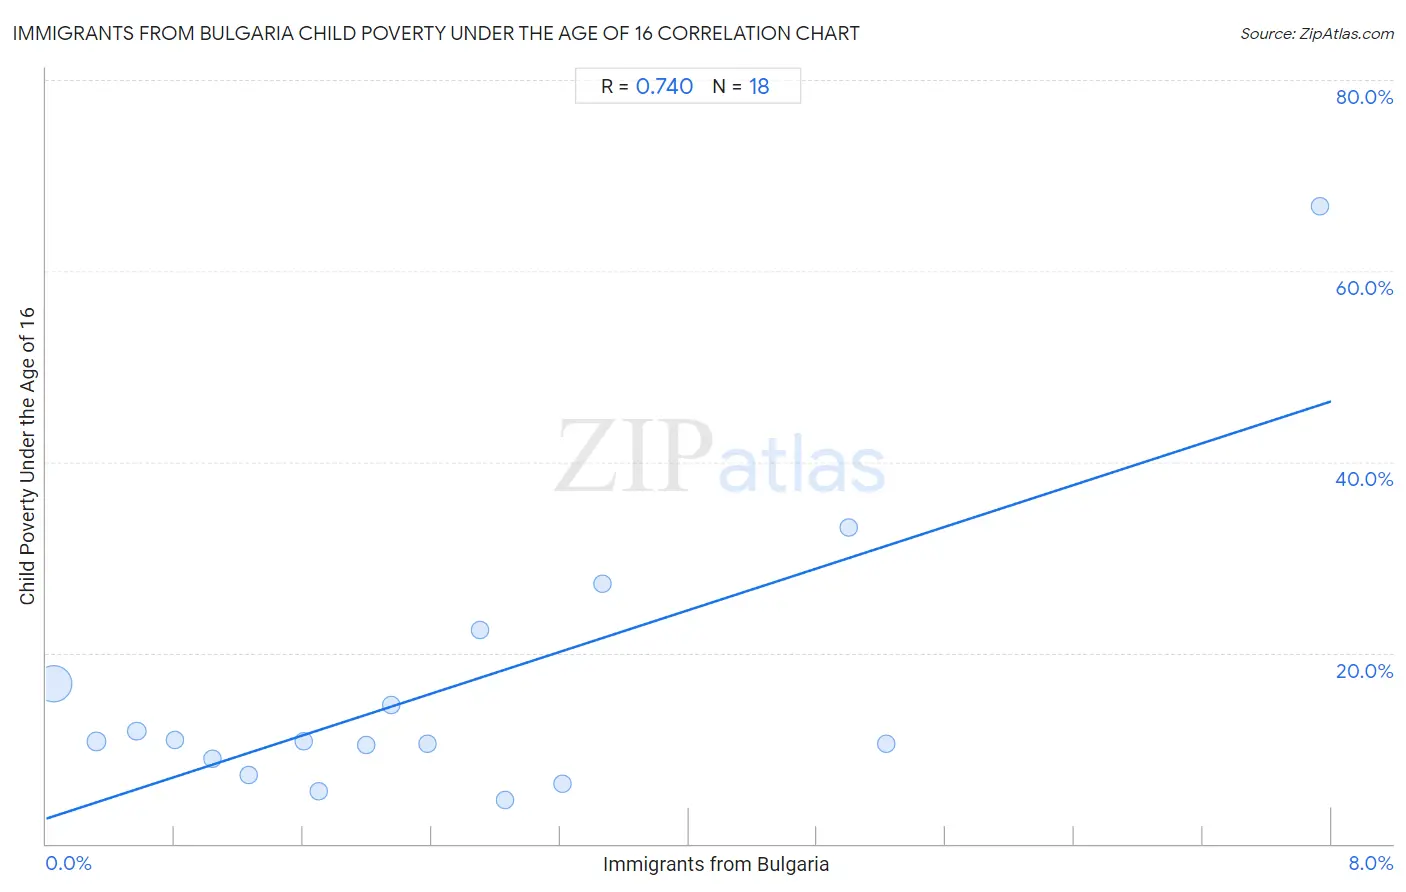 Immigrants from Bulgaria Child Poverty Under the Age of 16